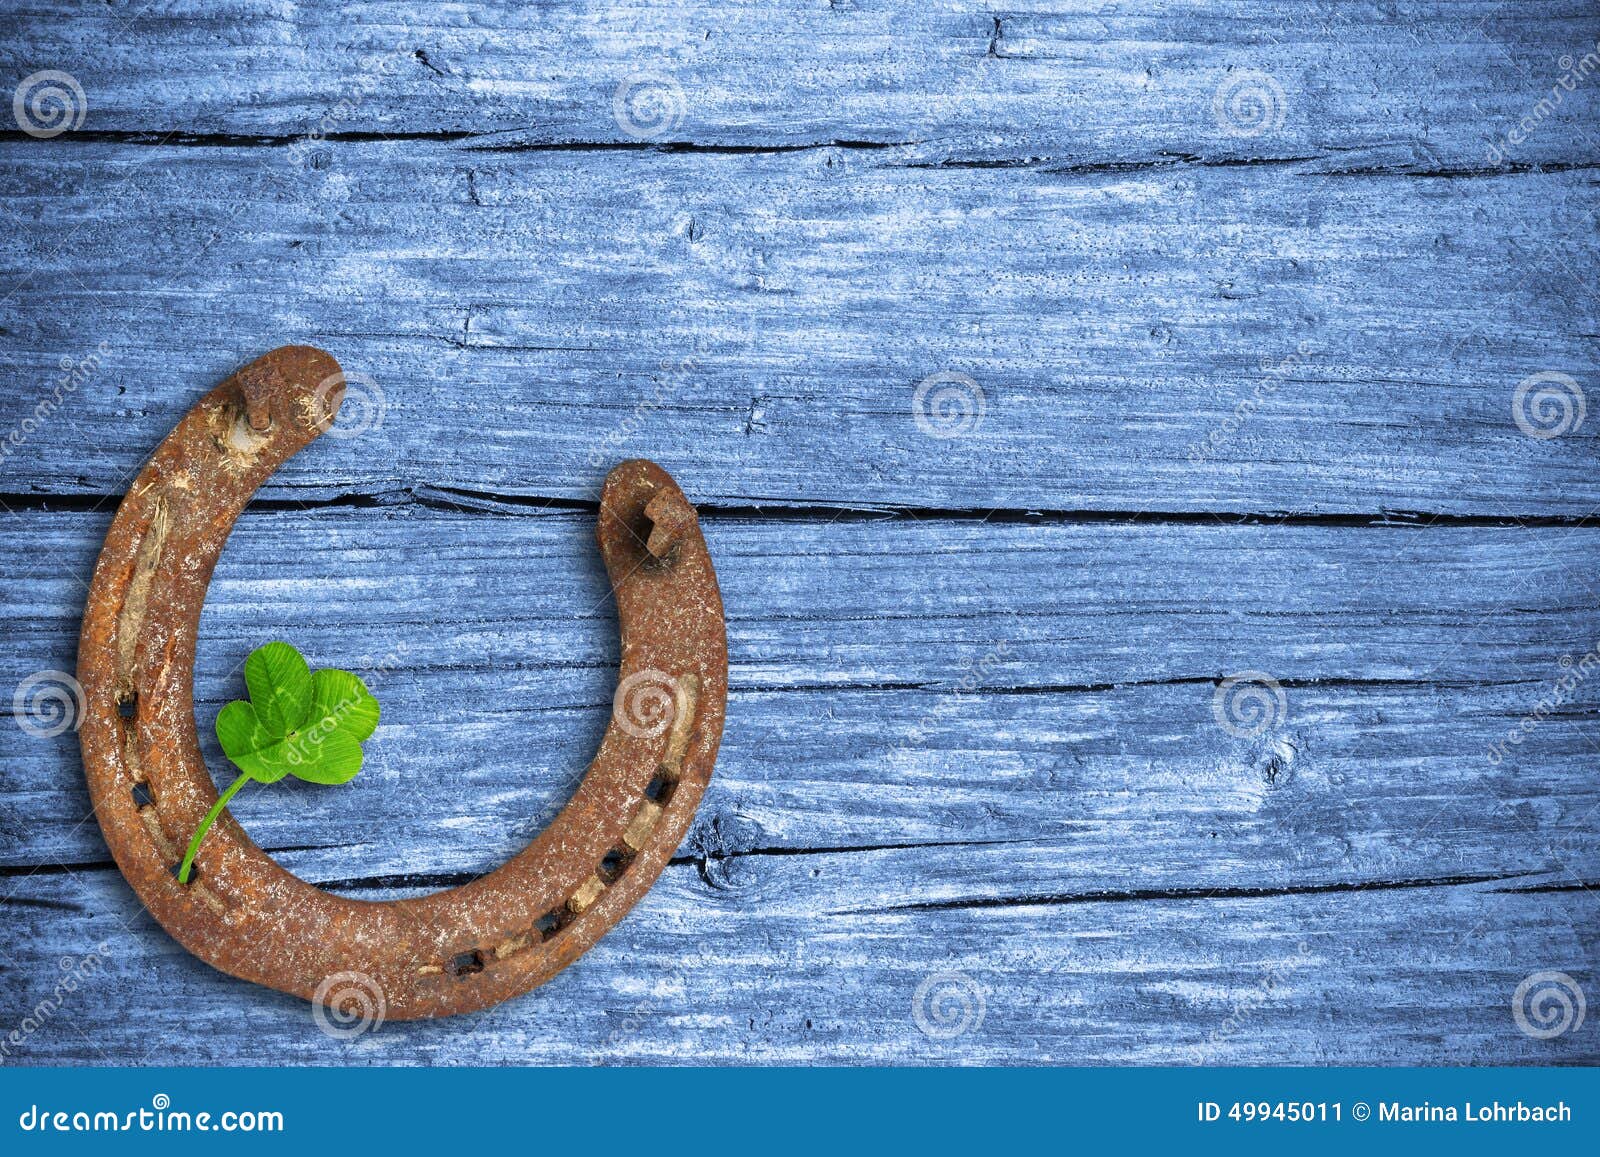 lucky charms, wooden background